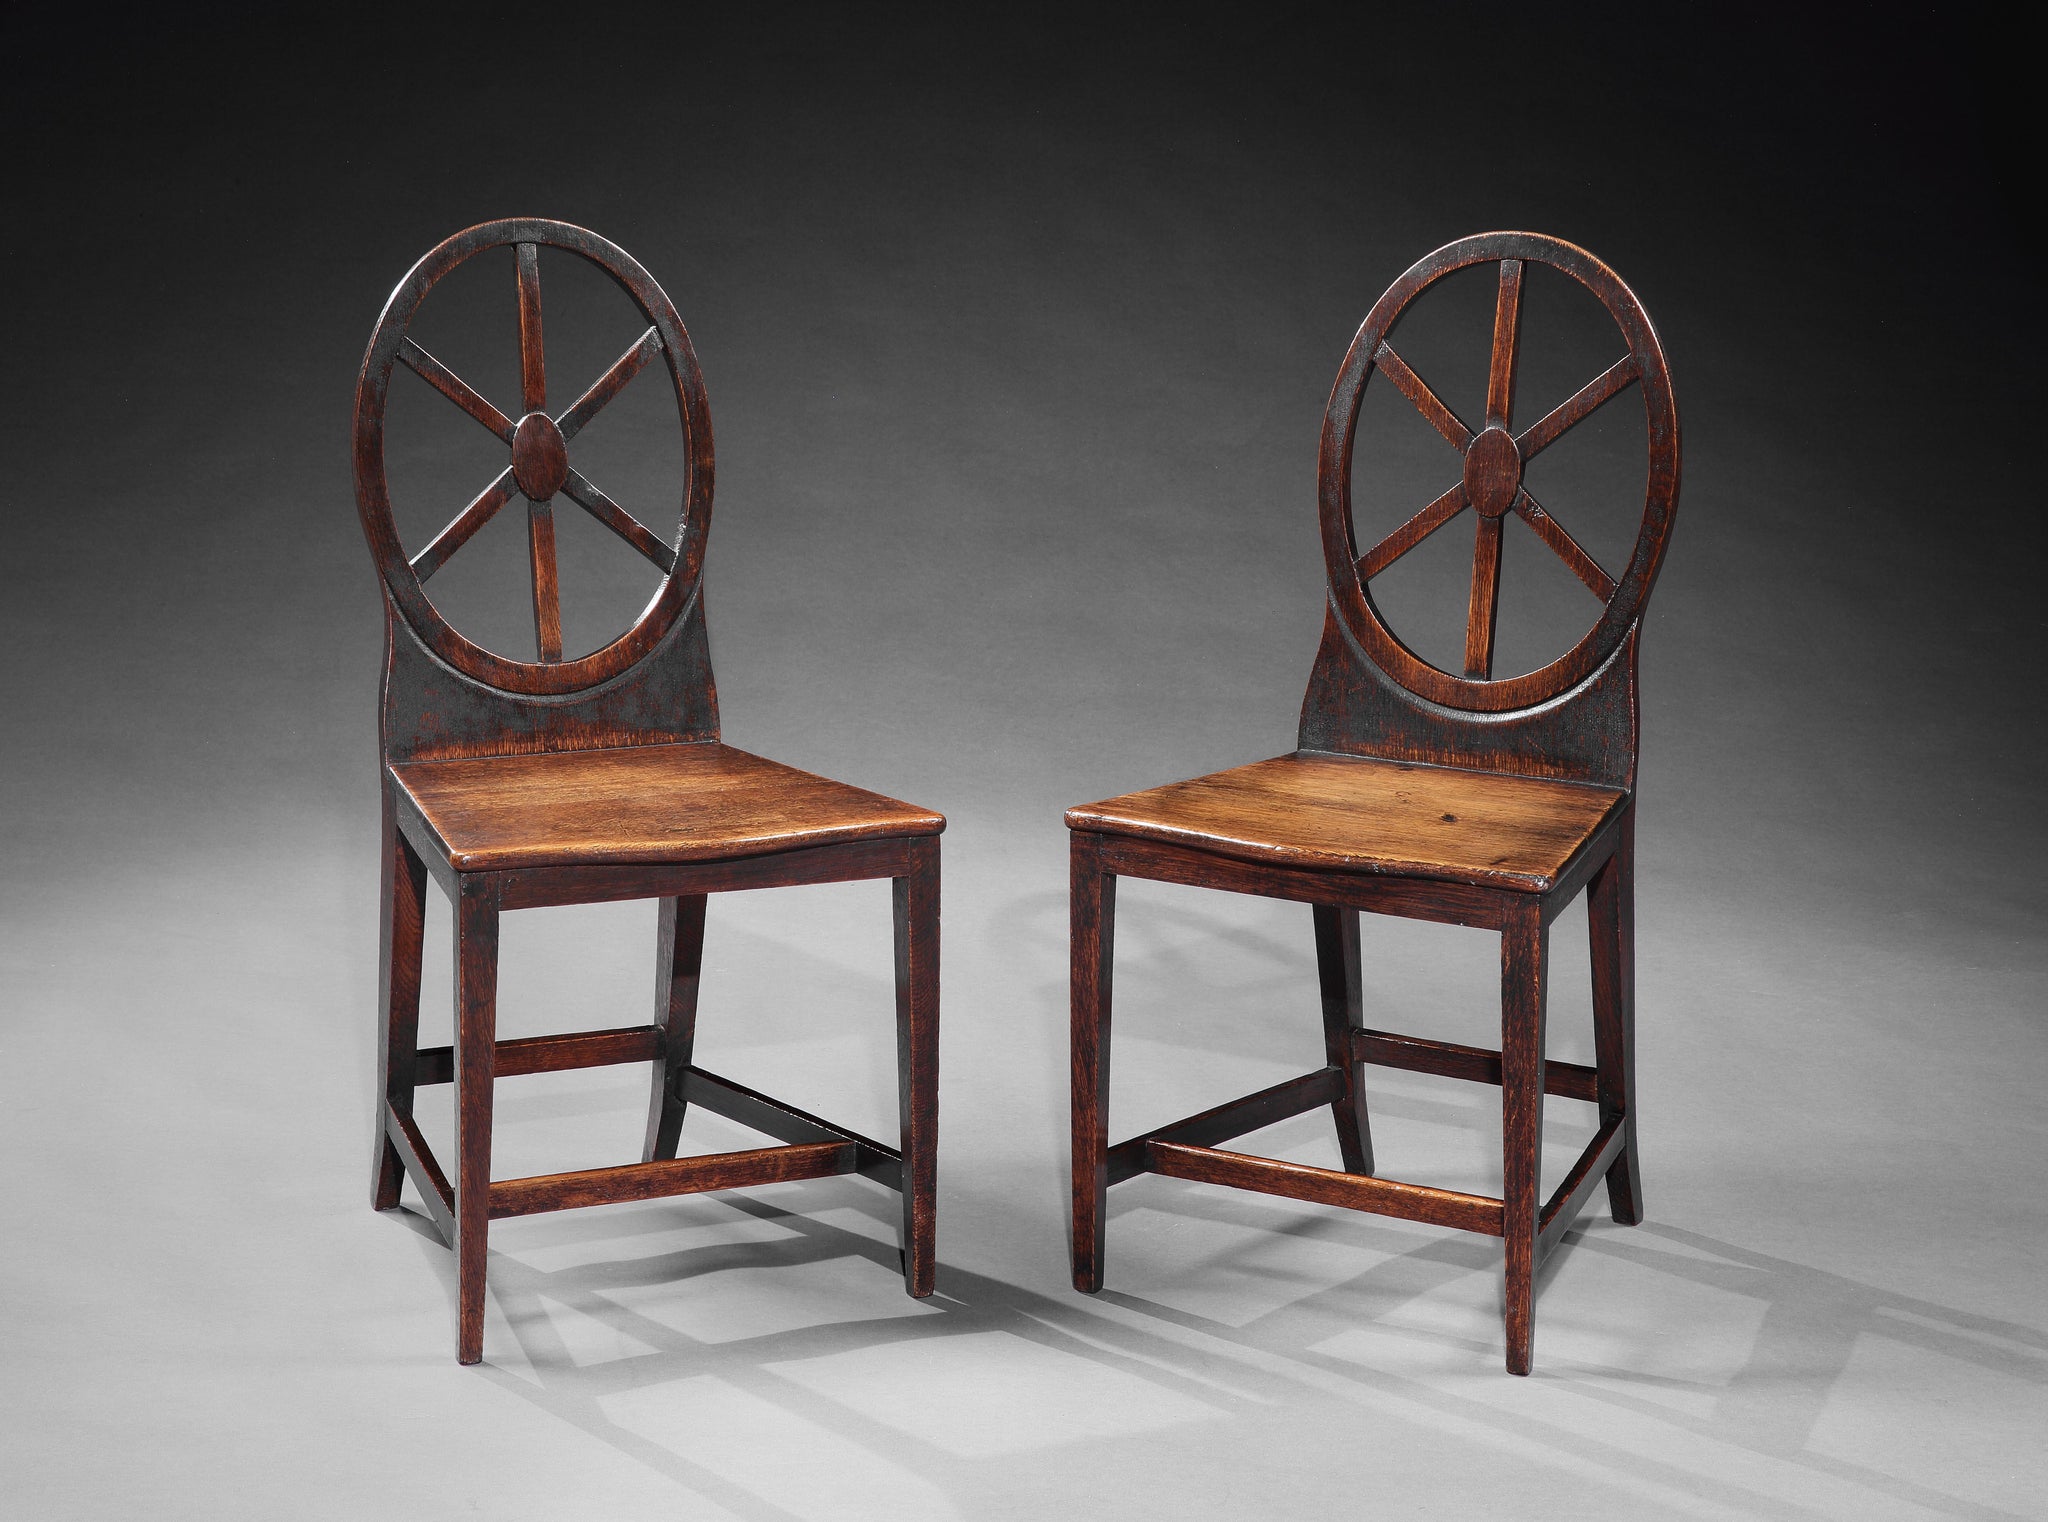 A Rare Pair of Graphic Vernacular "Wheelback" Side Chairs